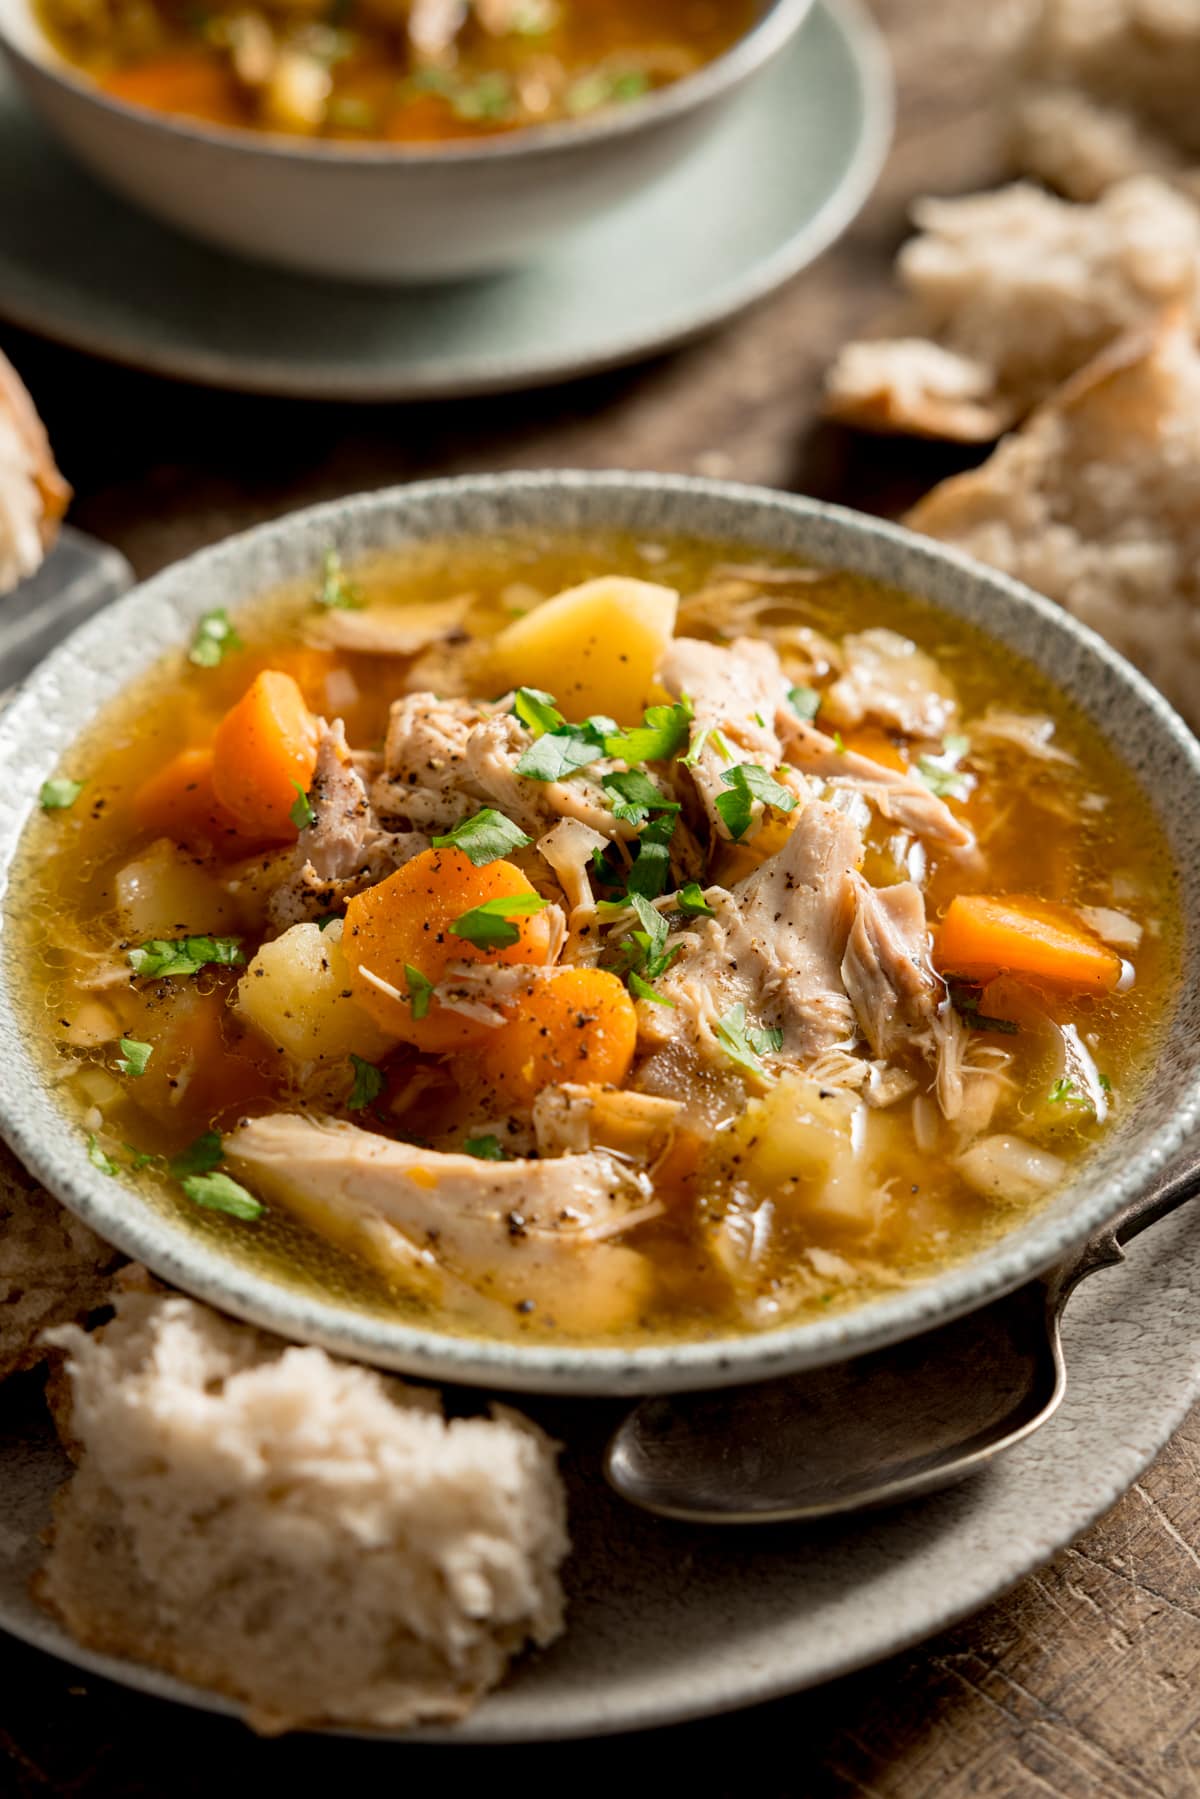 Tall image of chicken and vegetable soup in a light bowl. The bowl is sat on a plate. There is a chunk of bread and a spoon nestled between the bowl and plate. The soup bowl is on a wooden table, and there is a further bowl in the background, along with some chunks of bread.